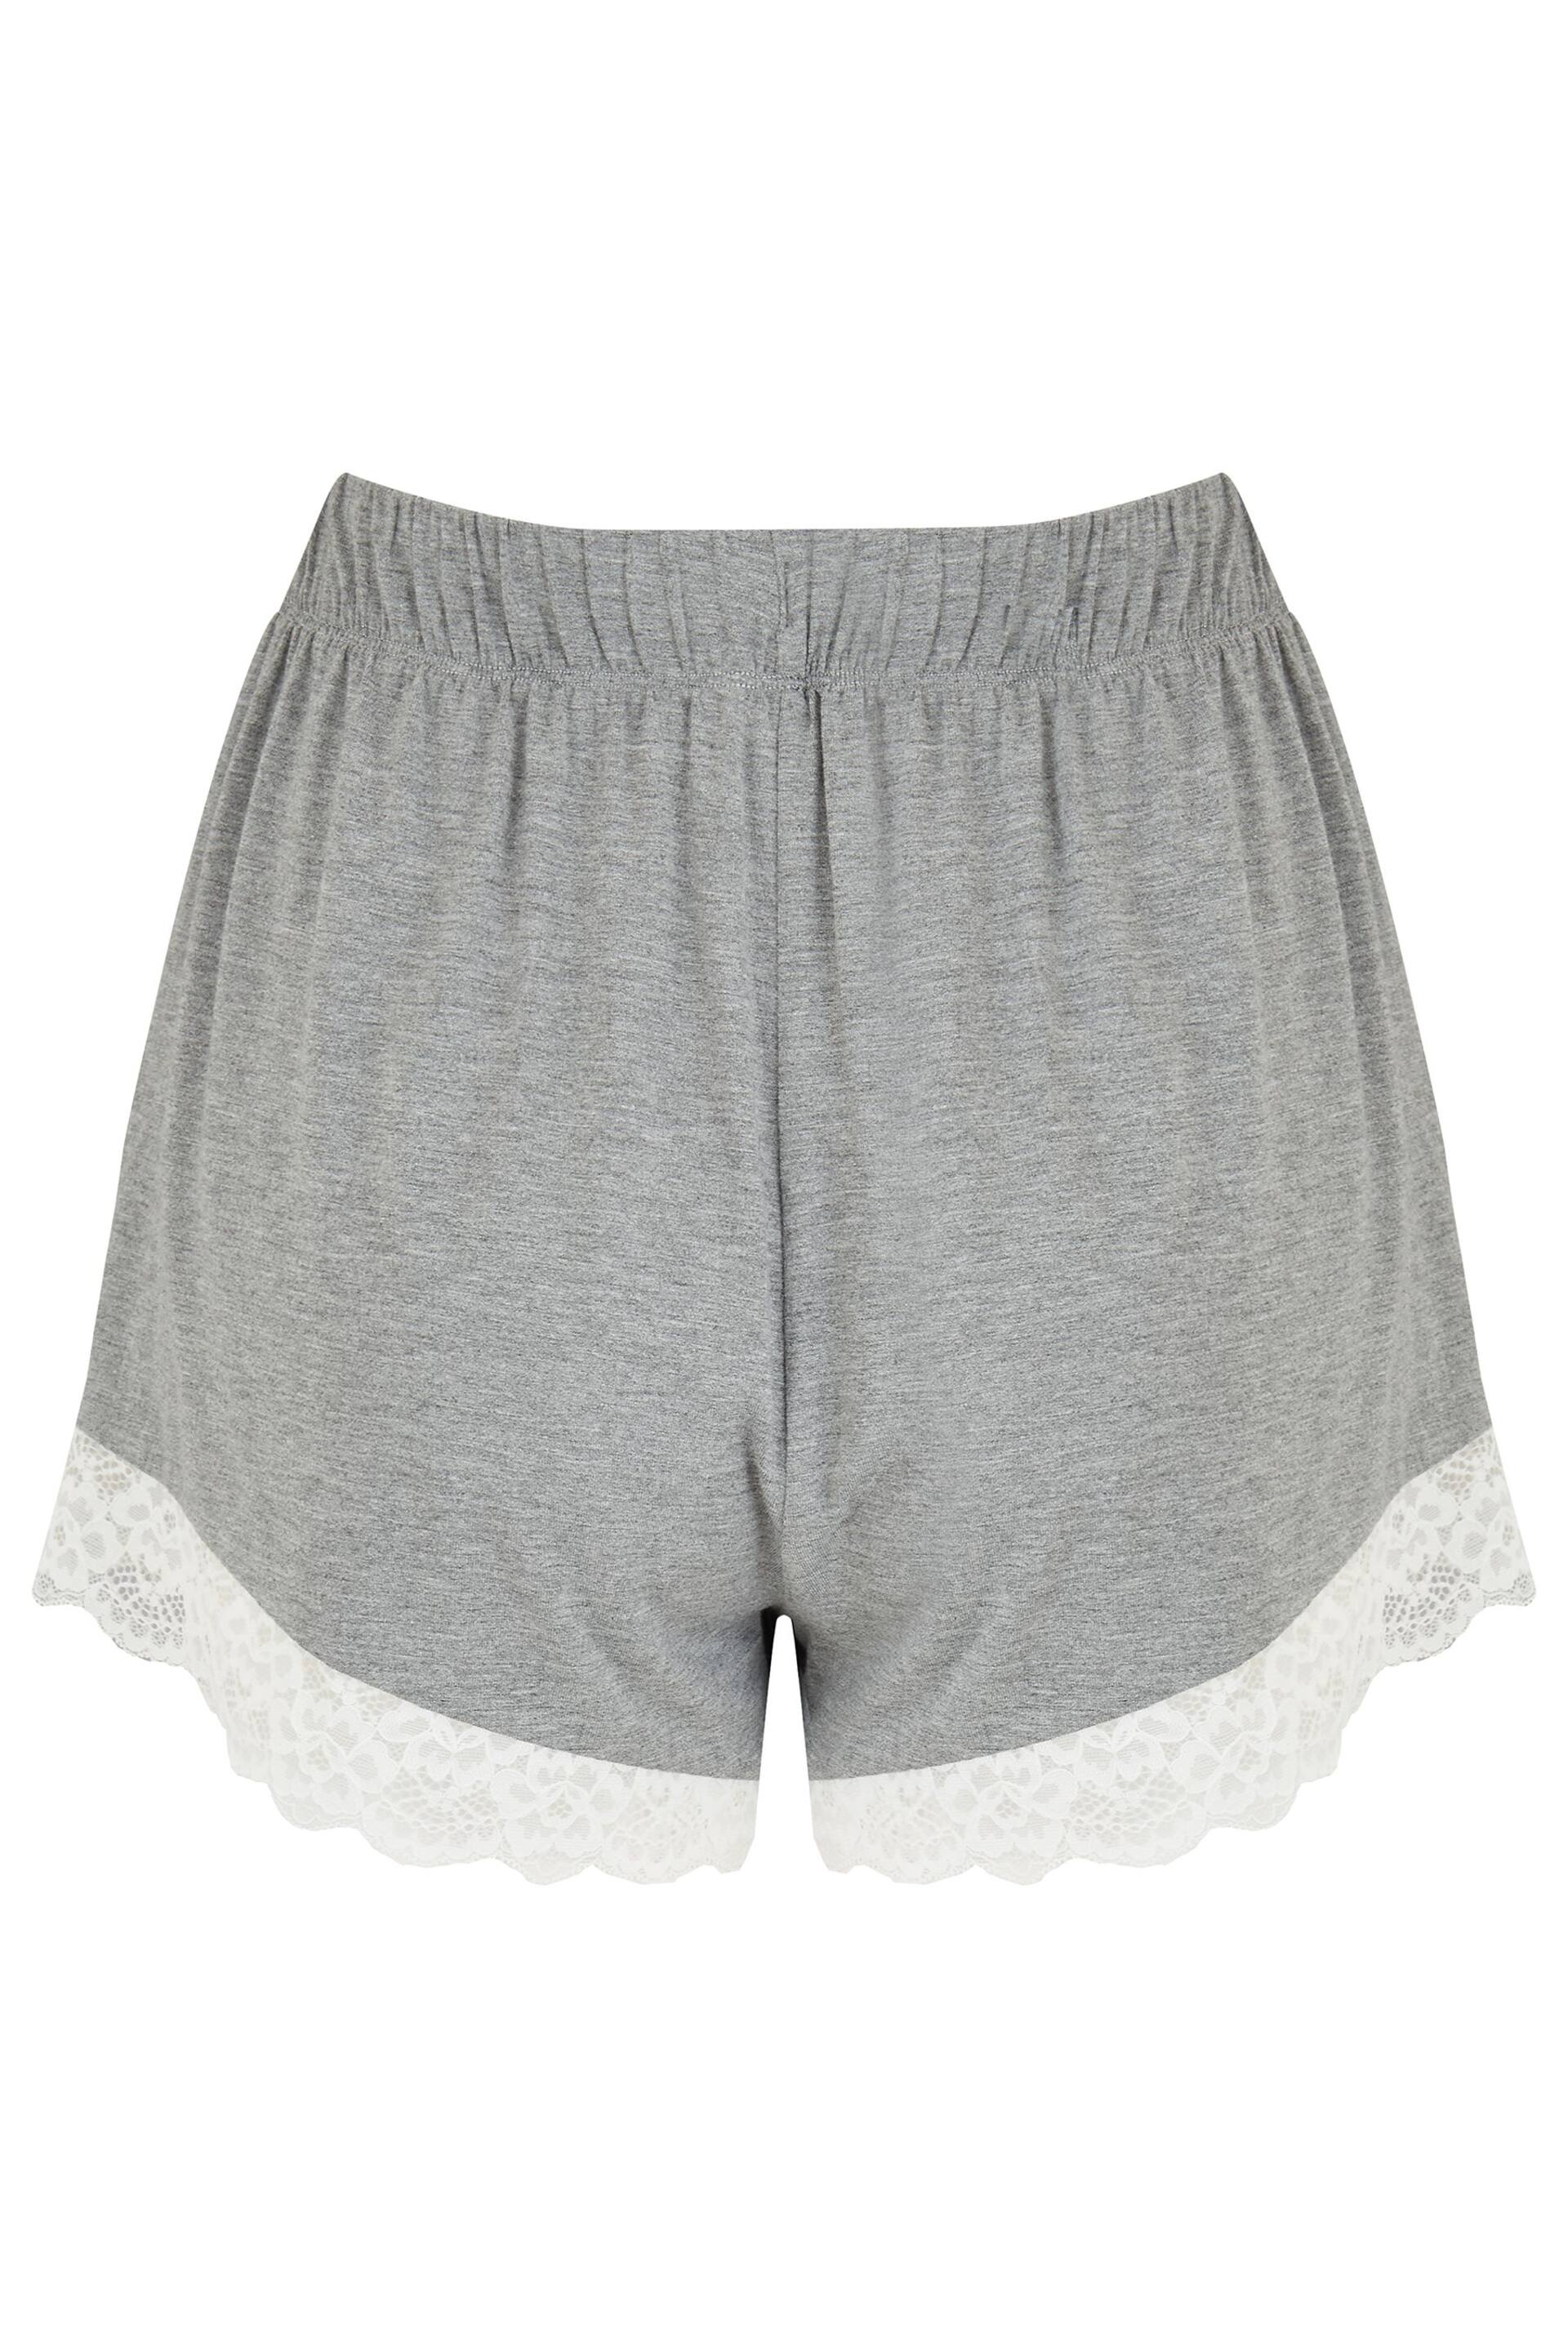 Pour Moi Light Grey Sofa Loves Lace Soft Jersey Shorts - Image 5 of 5